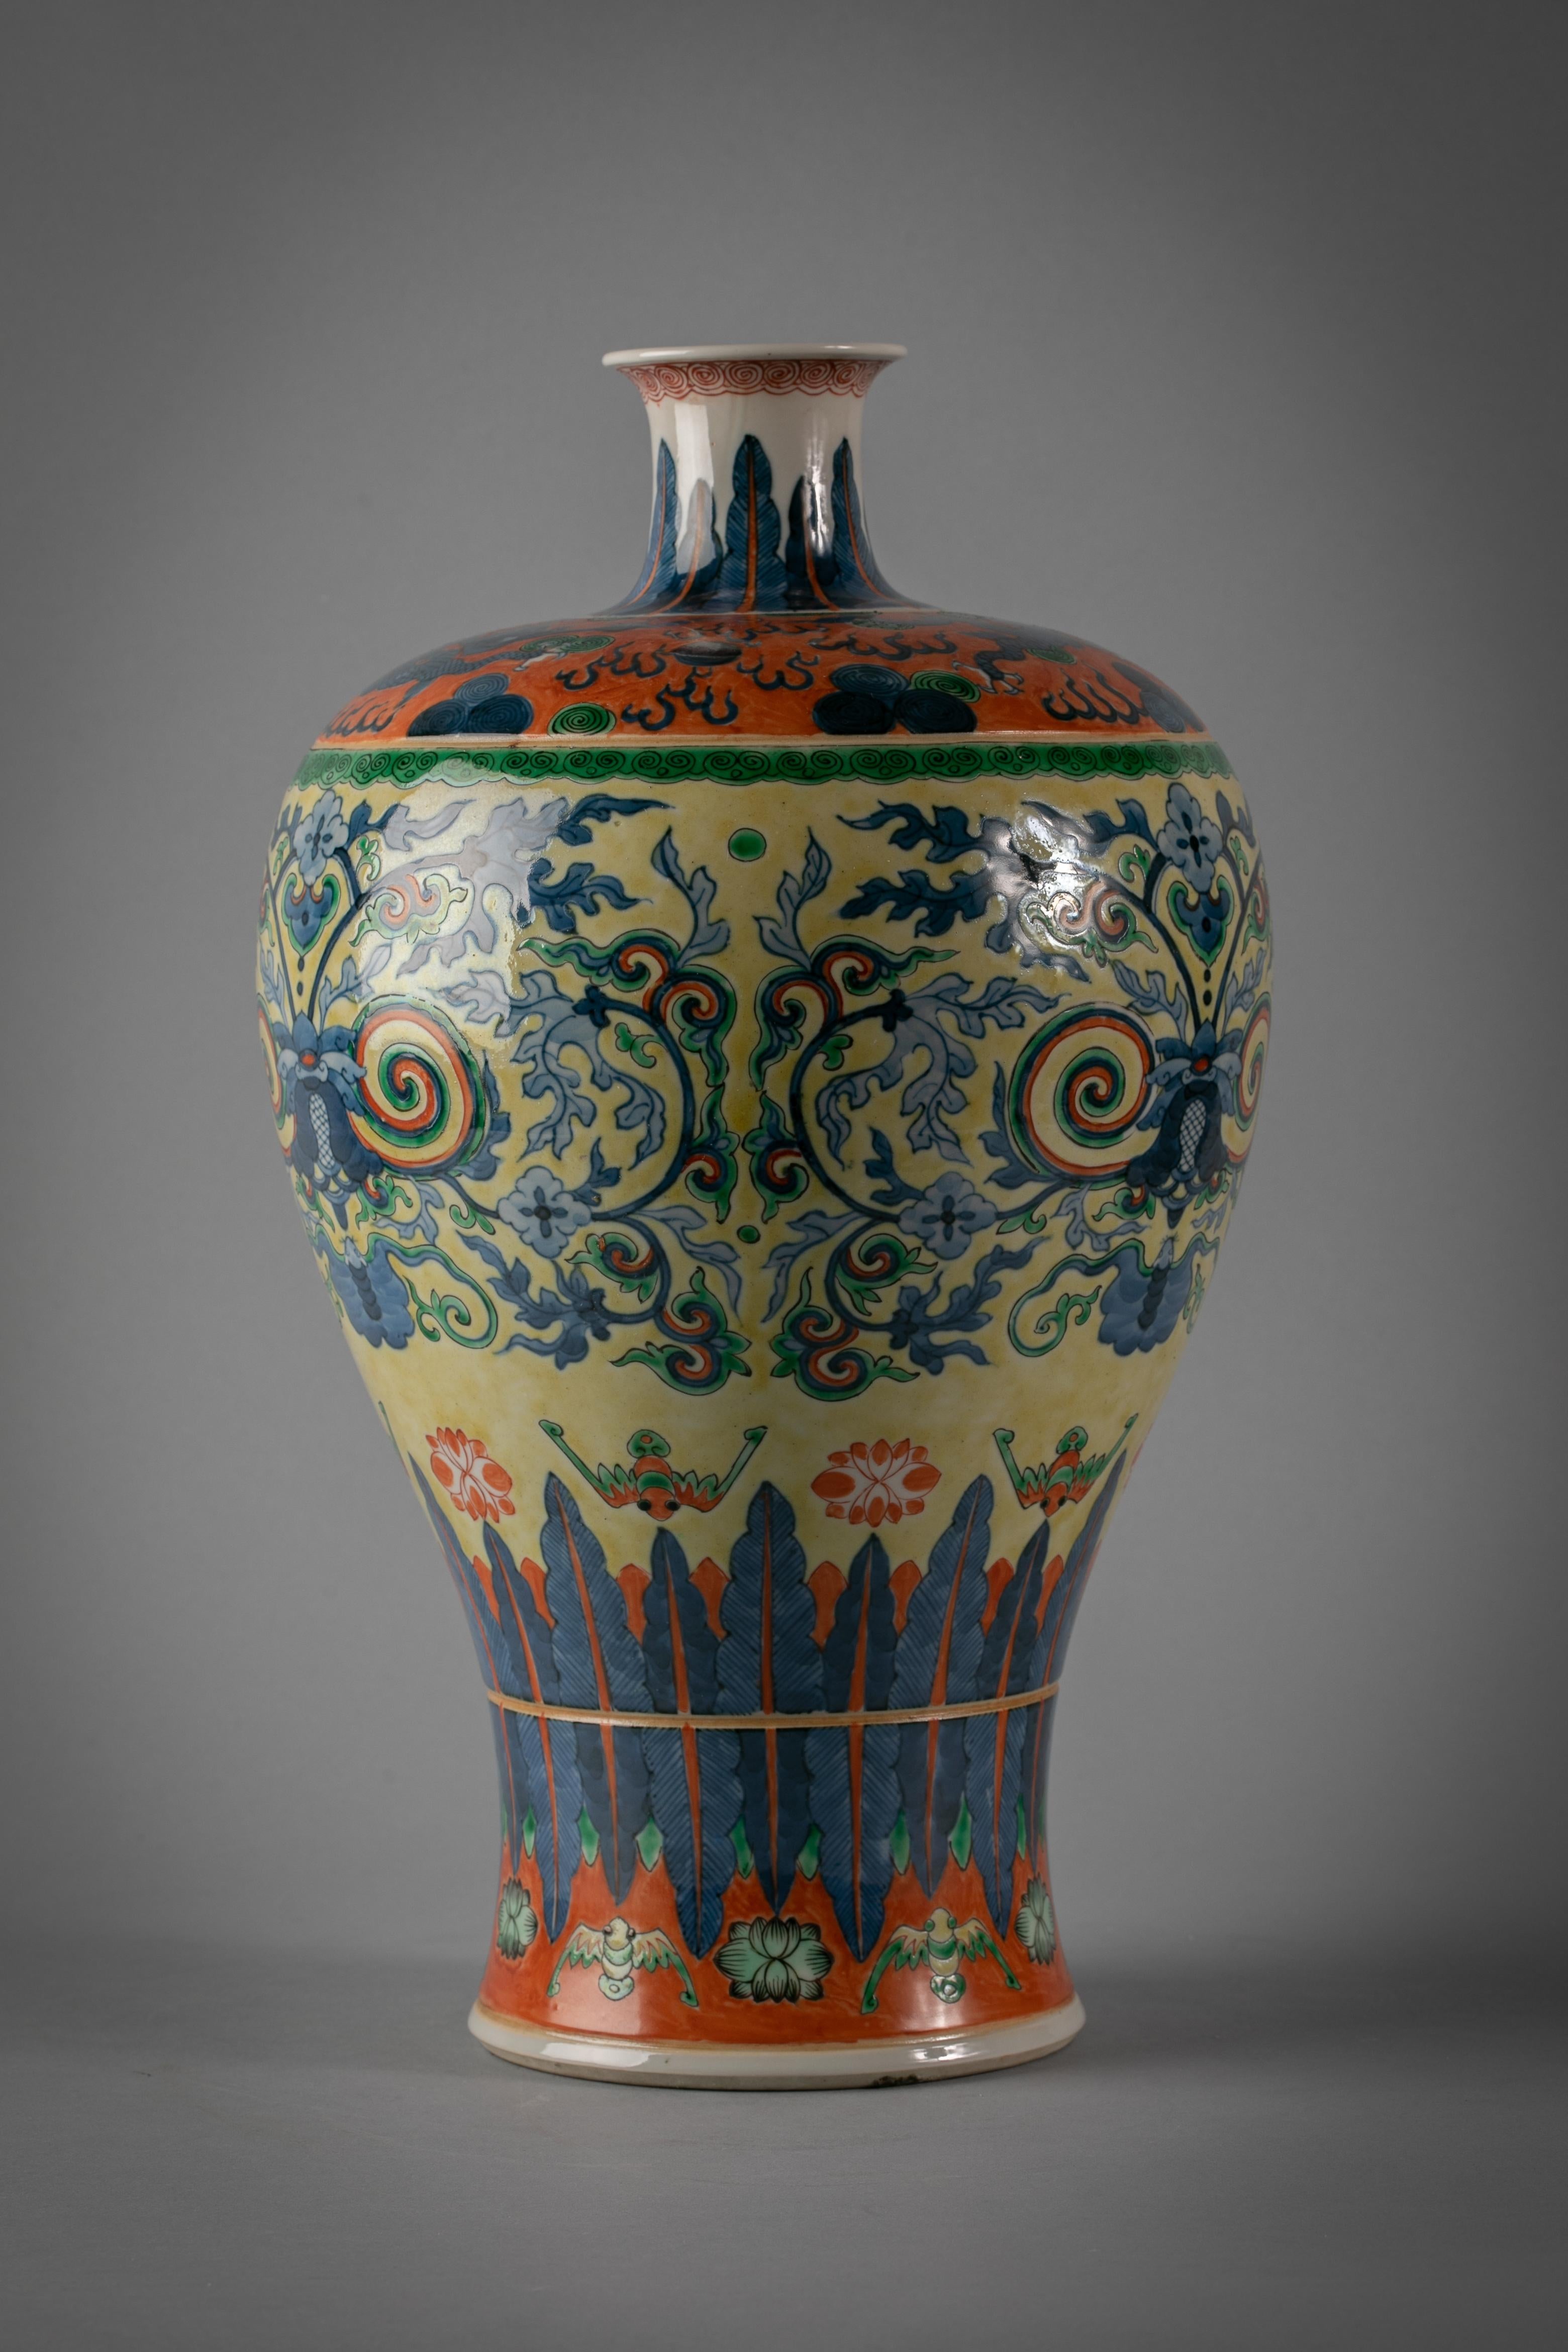 Probably a blue and white Chinese vase with some subsequent colors added.